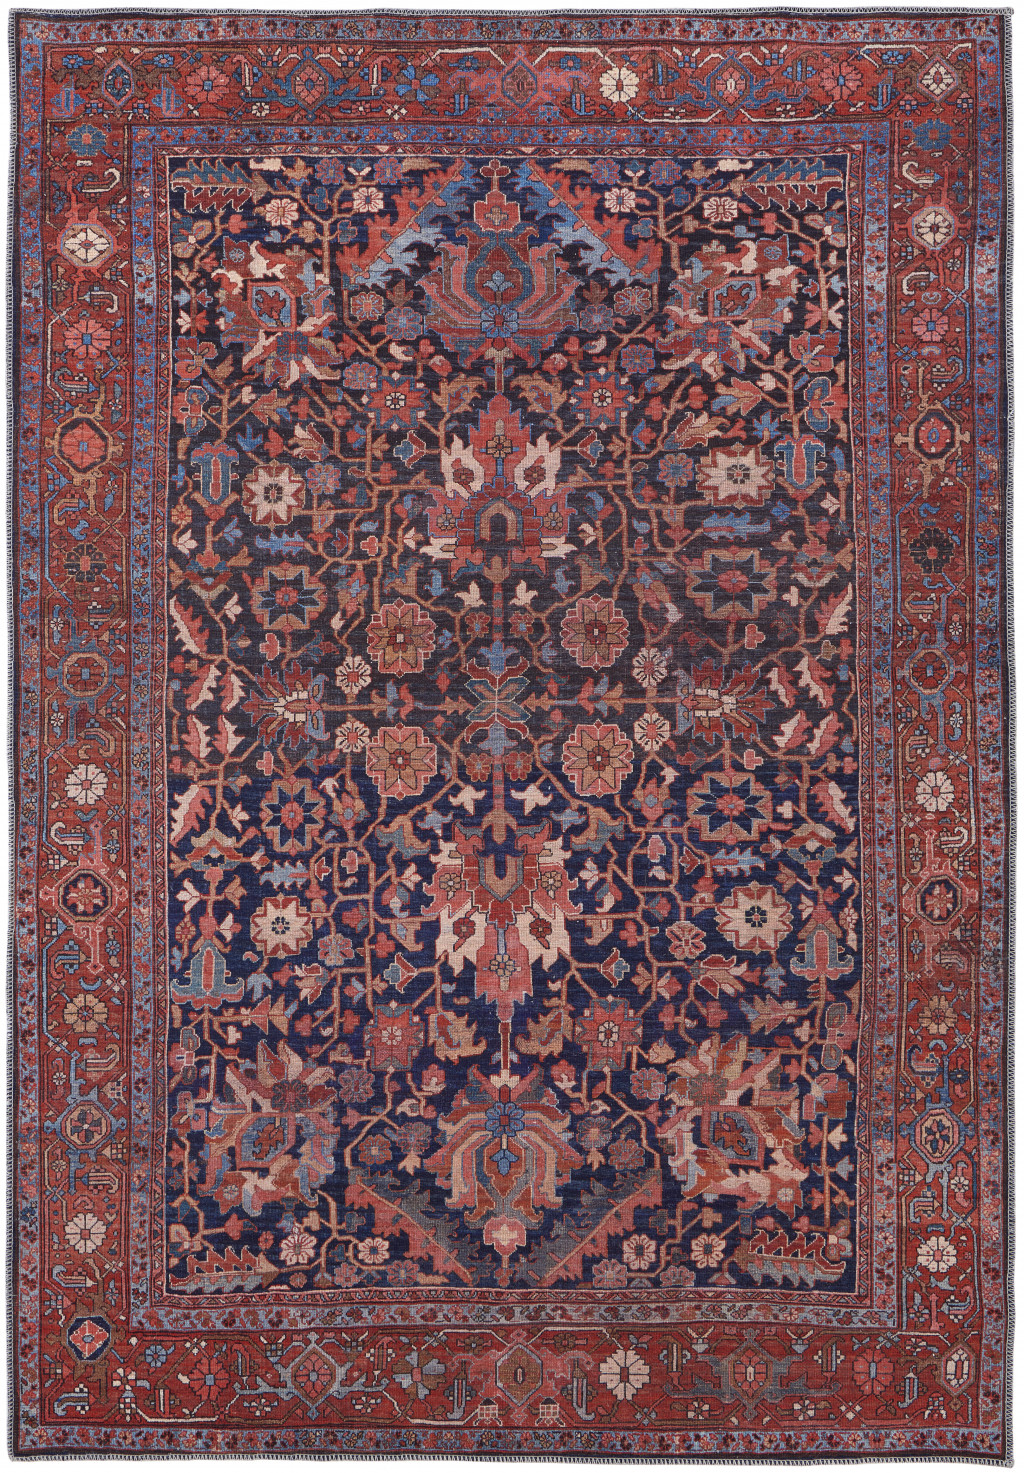 9' X 12' Red Orange And Blue Floral Power Loom Area Rug-515122-1